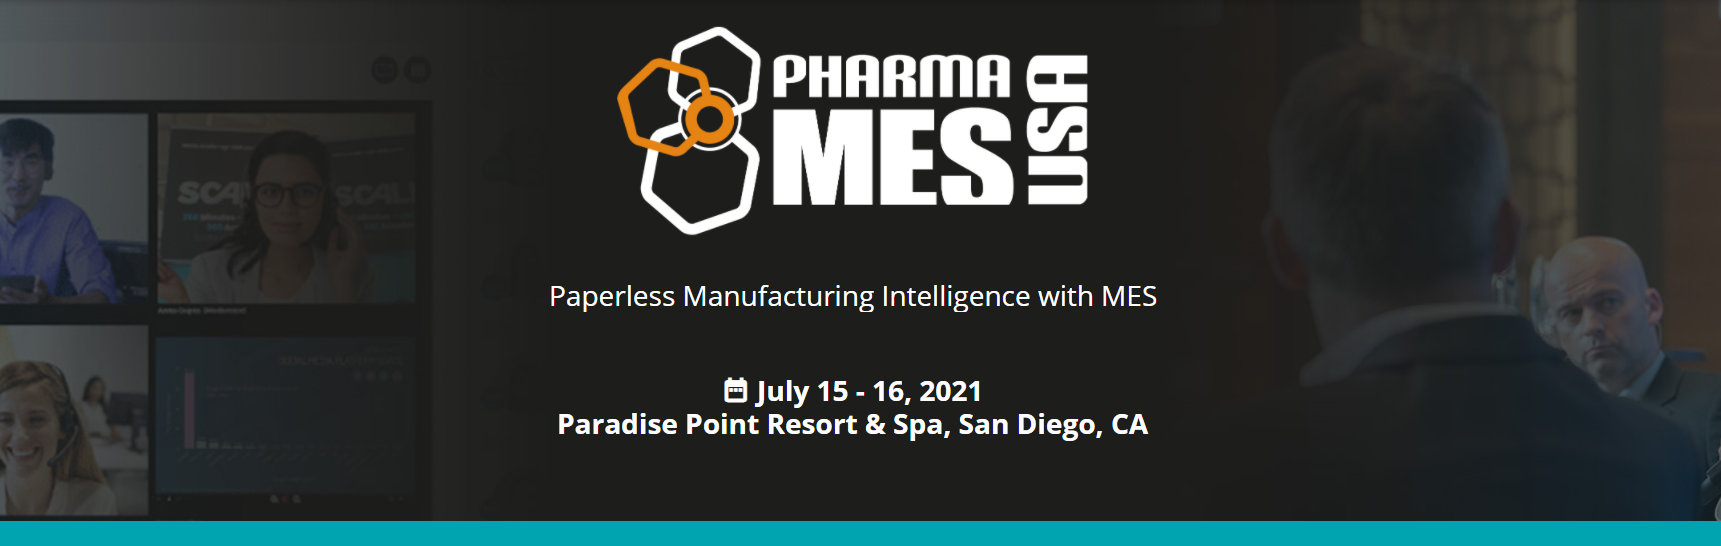 Grantek to Exhibit at the 2021 Pharma MES USA Show in San Diego, CA